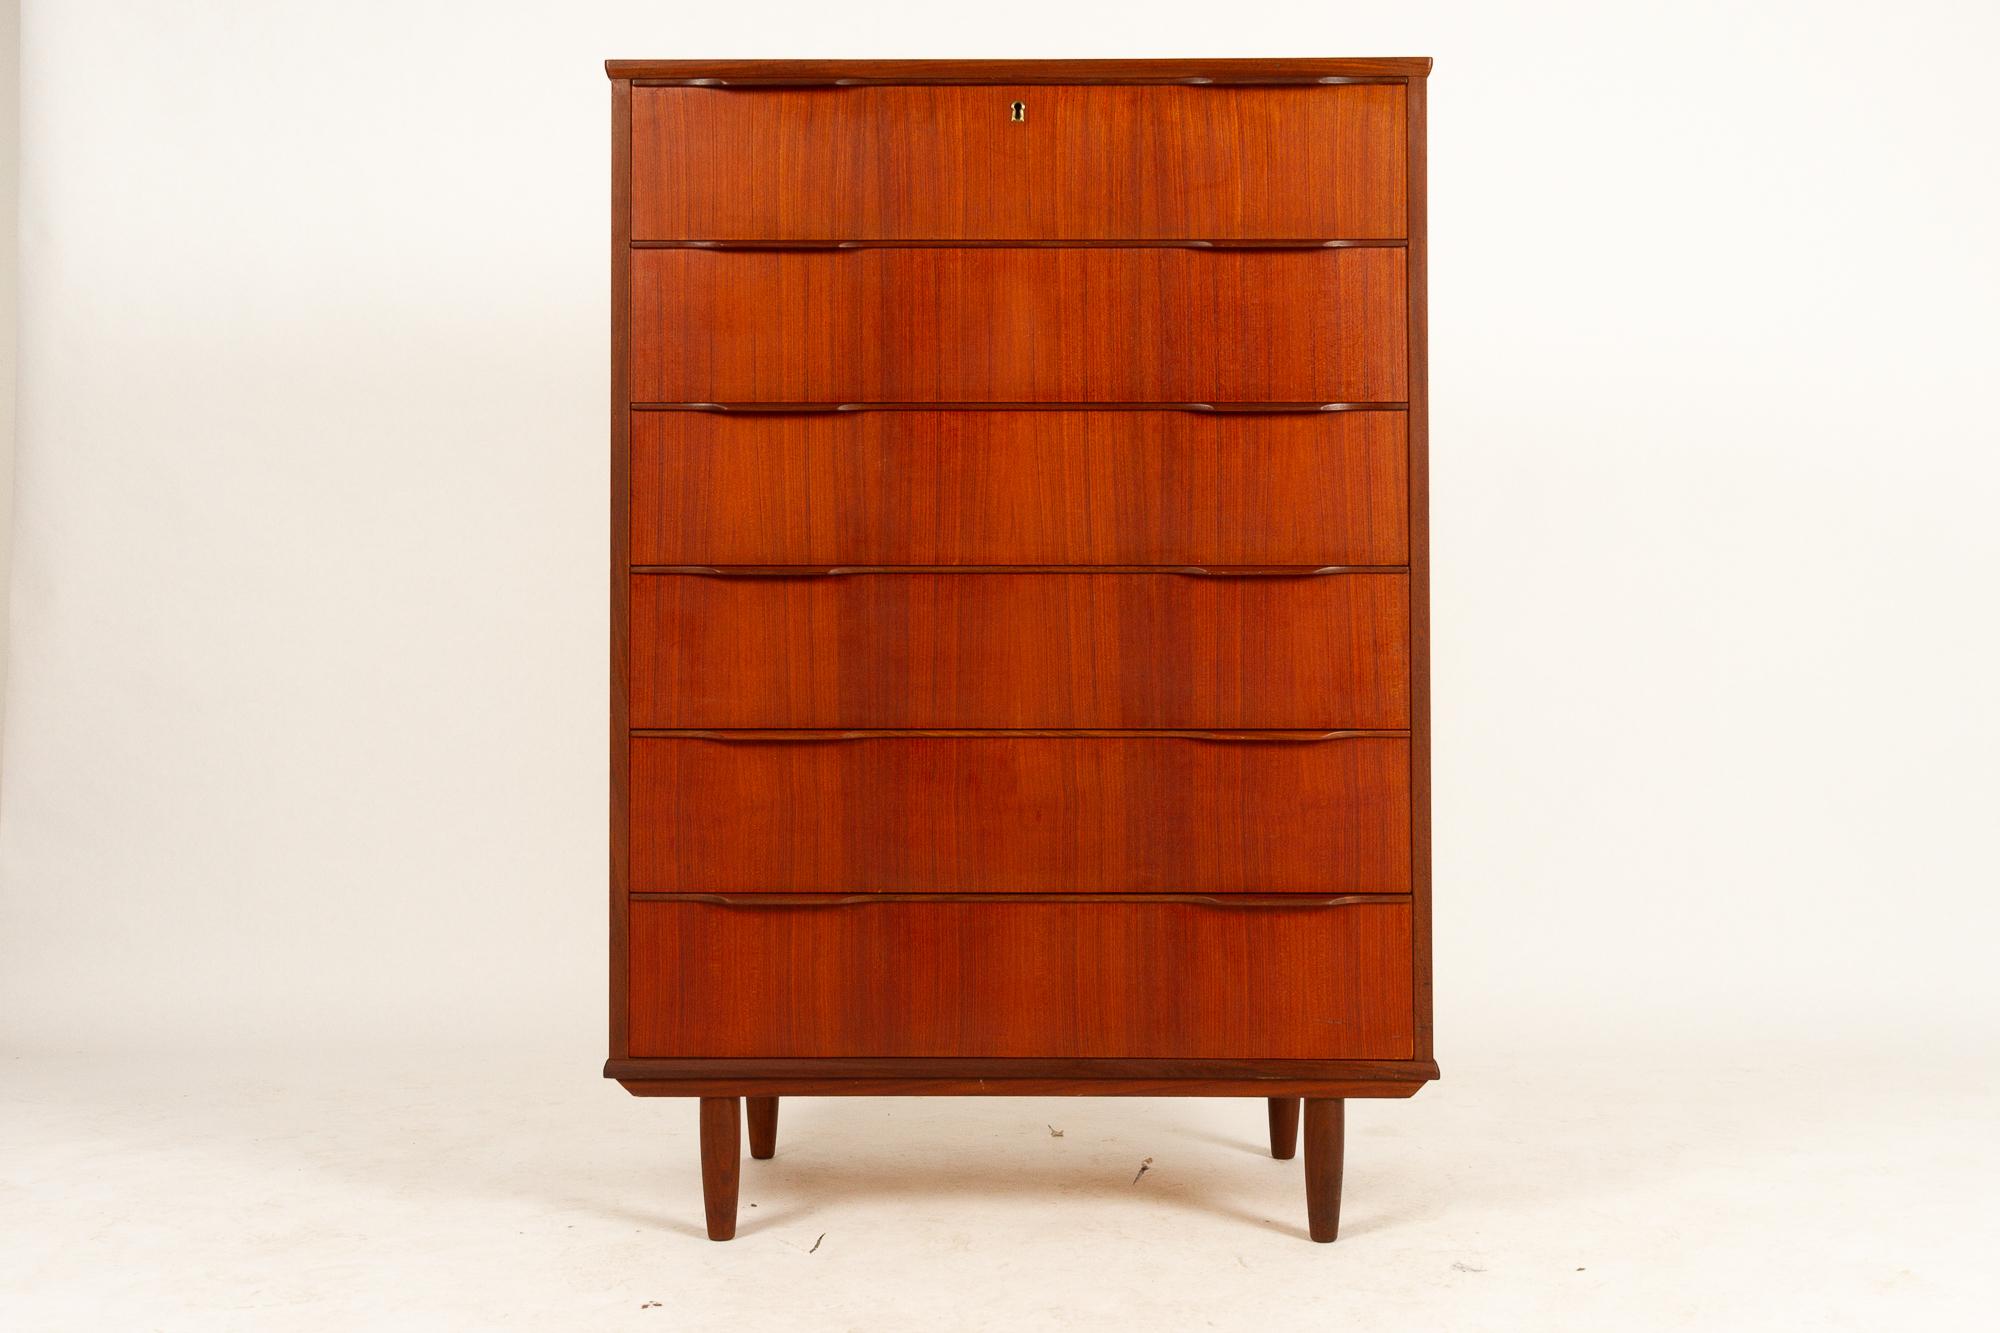 Danish teak tallboy dresser, 1960s.
Mid-Century Modern tall chest of drawers in teak veneer with six large drawers with sculpted handles in solid teak. Round tapered legs in solid teak.
Good original vintage condition. Lock is defect, please see